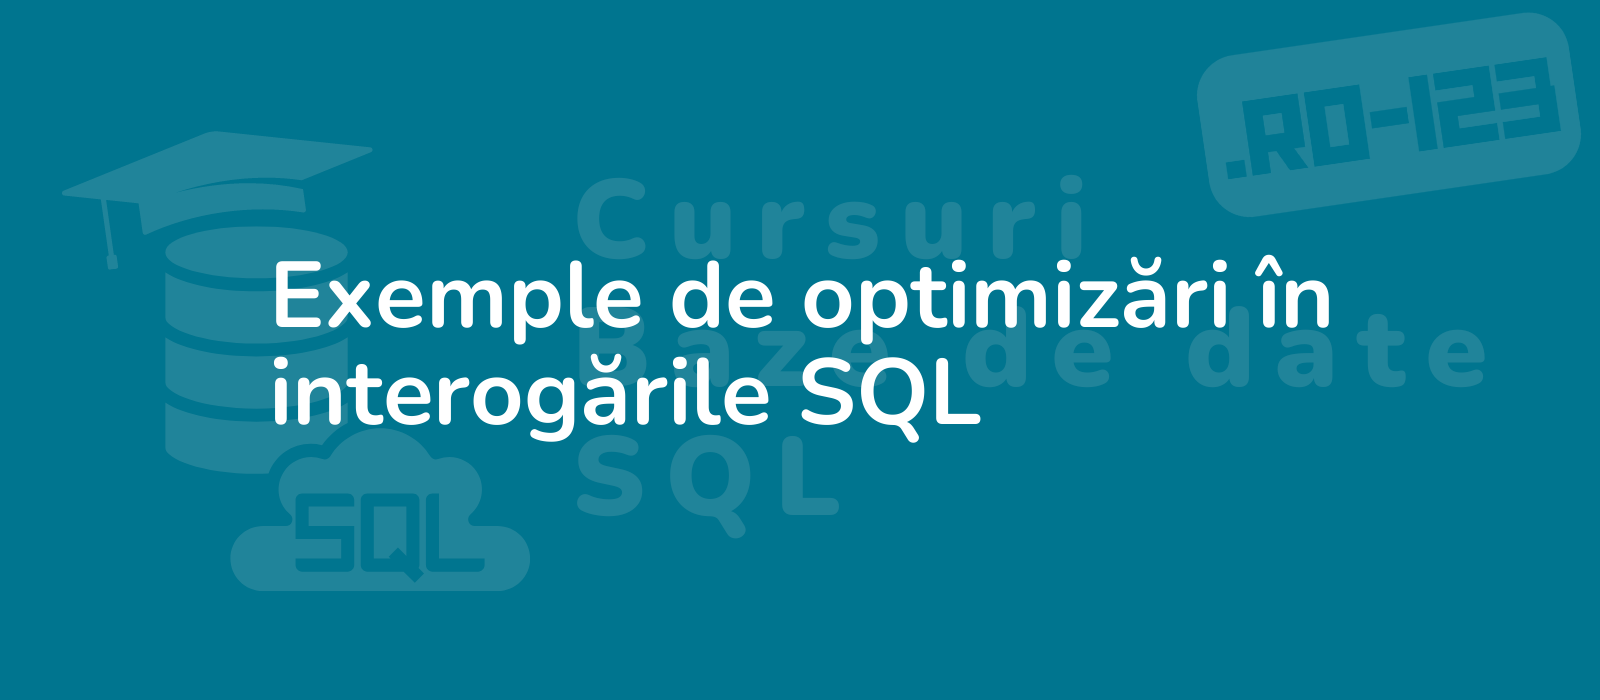 the representative image for the title exemple de optimiz i n interog ile sql could be described as illustration showcasing optimized sql queries with code snippets on a sleek background minimalistic design 4k resolution